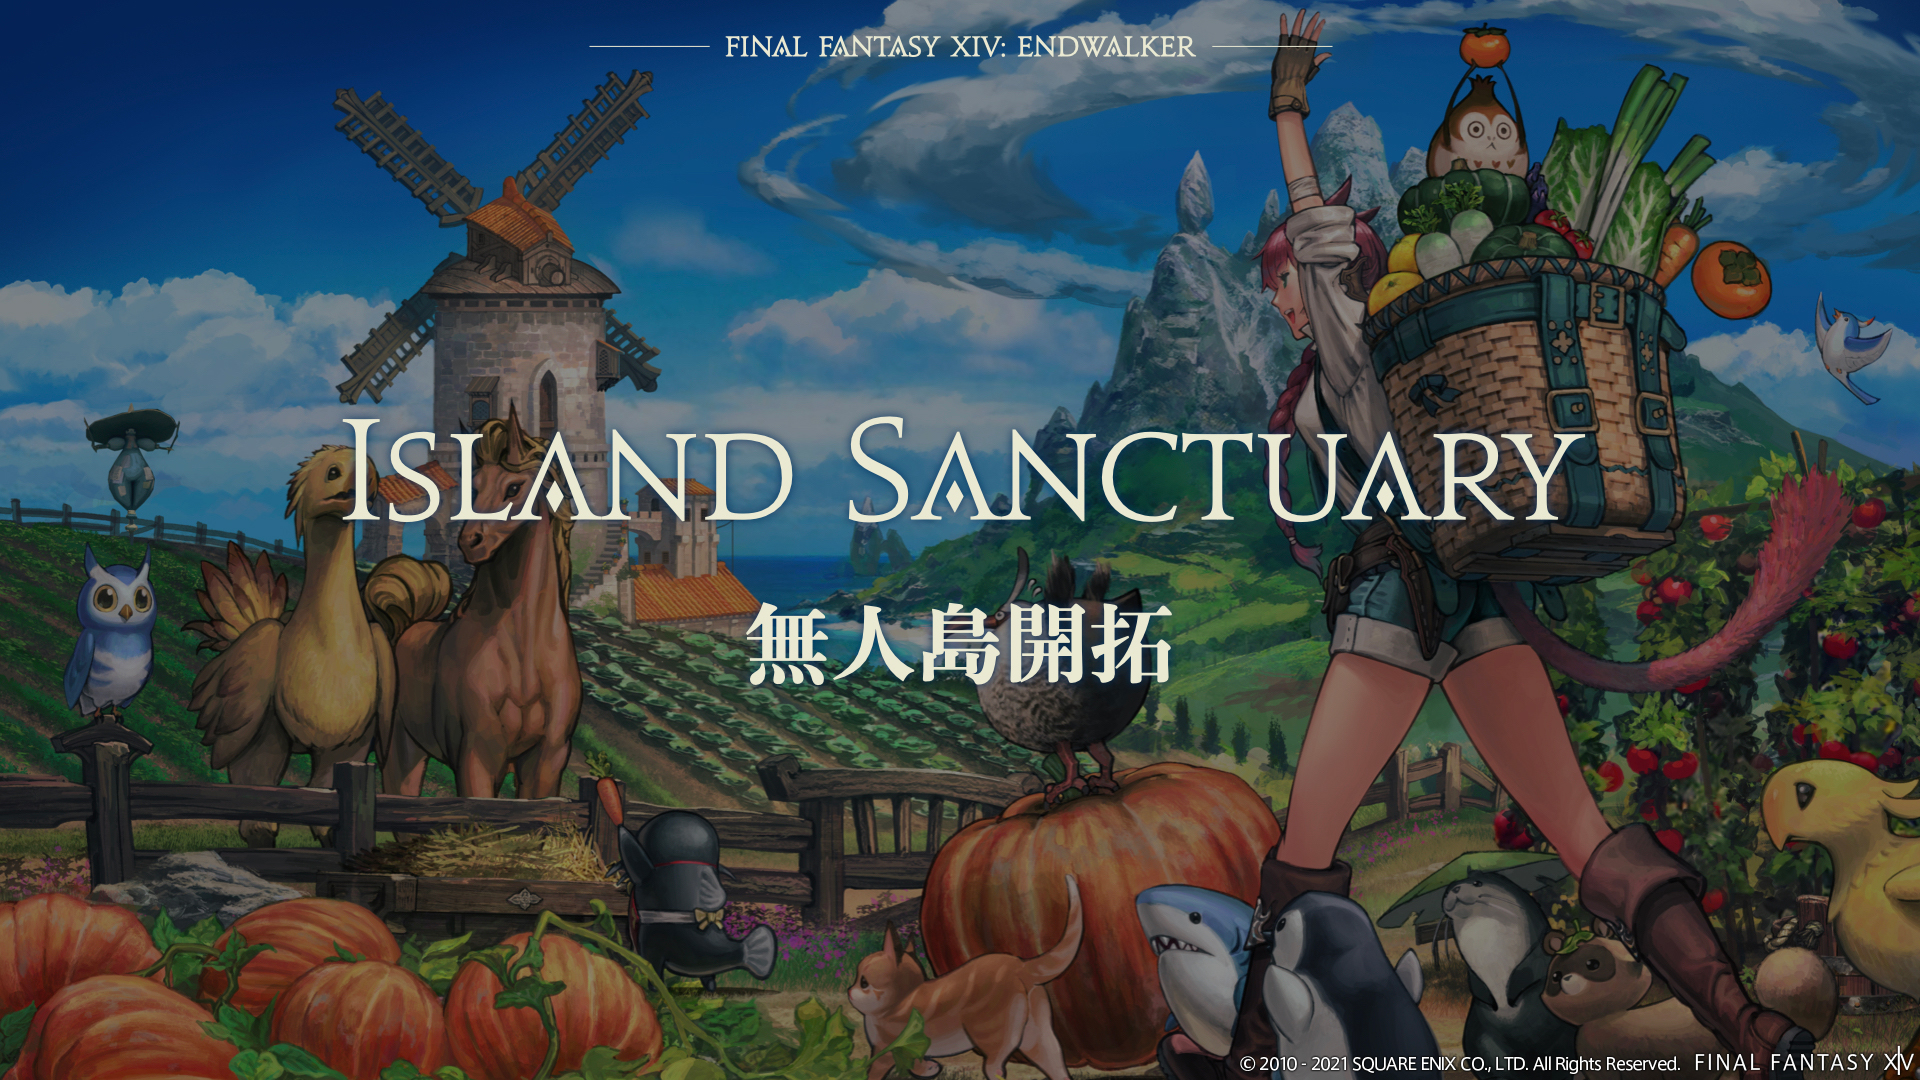 Island Sanctuary in FFXIV – What We Know So Far